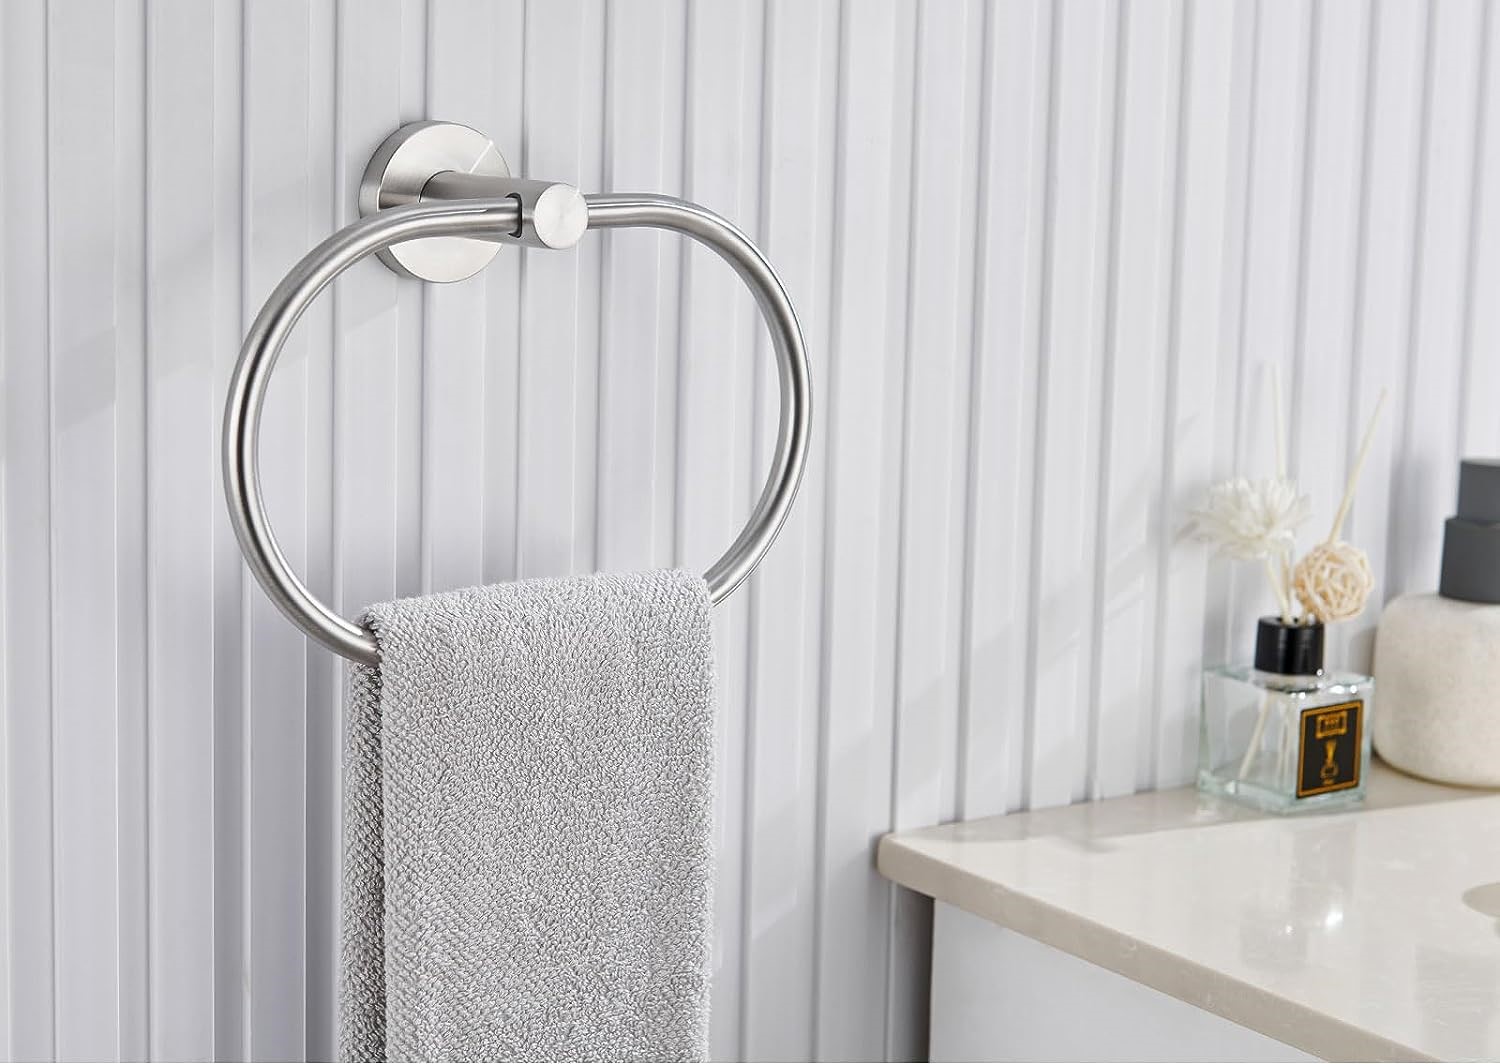 advice on placement of hand towel ring